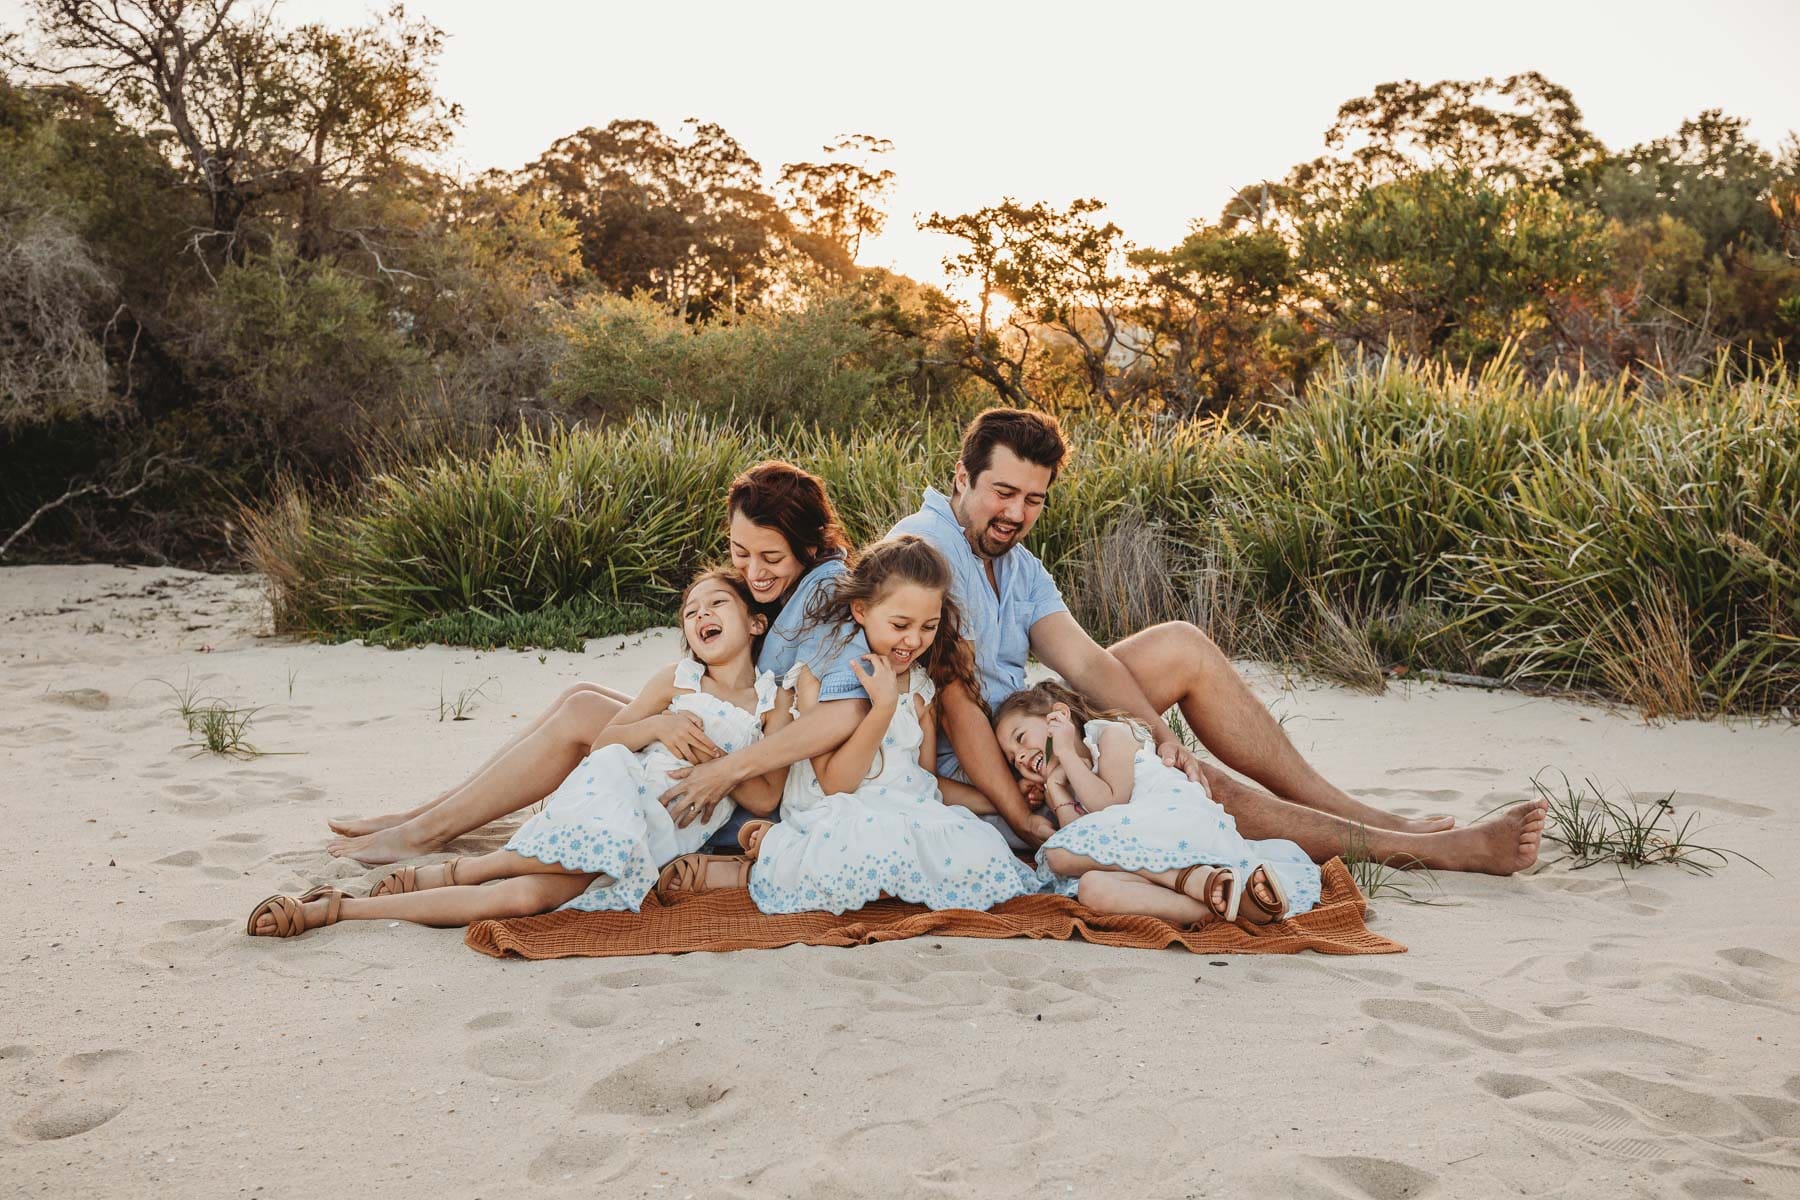 Parents sit on a blanket tickling their 3 girls as the sun sets over the beach